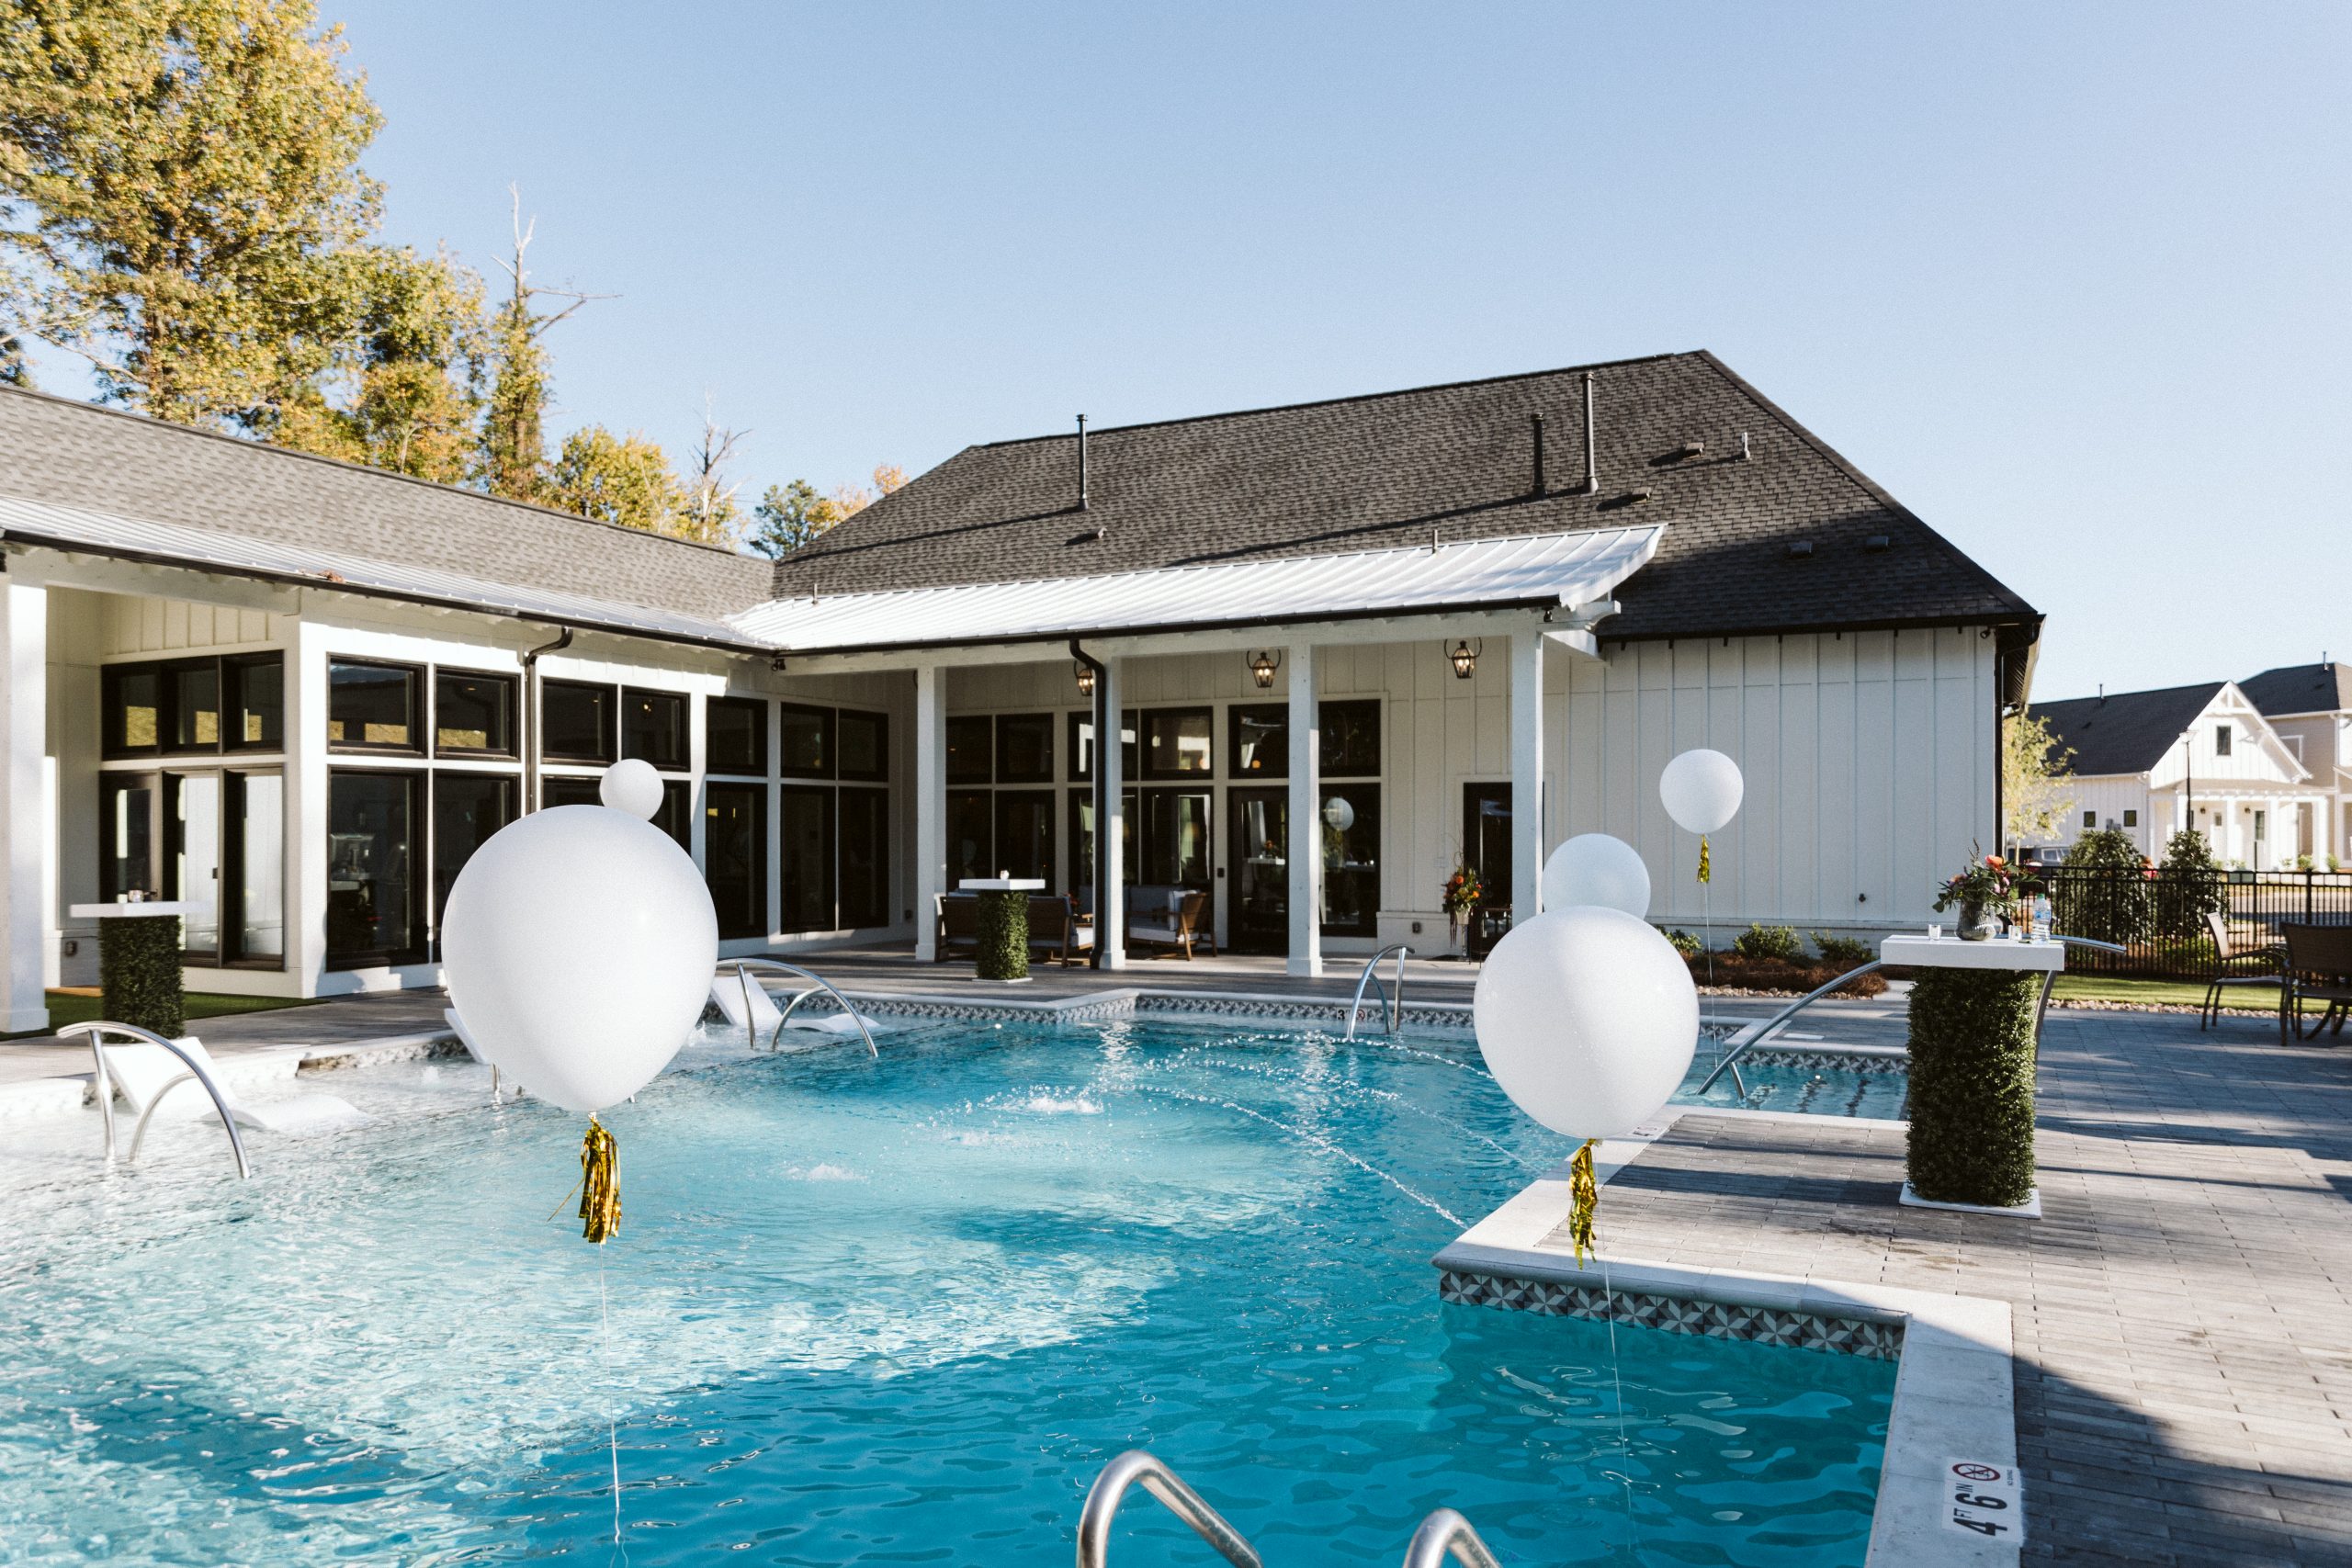 Community pool at The Heights Clubhouse in Irondale, Alabama.